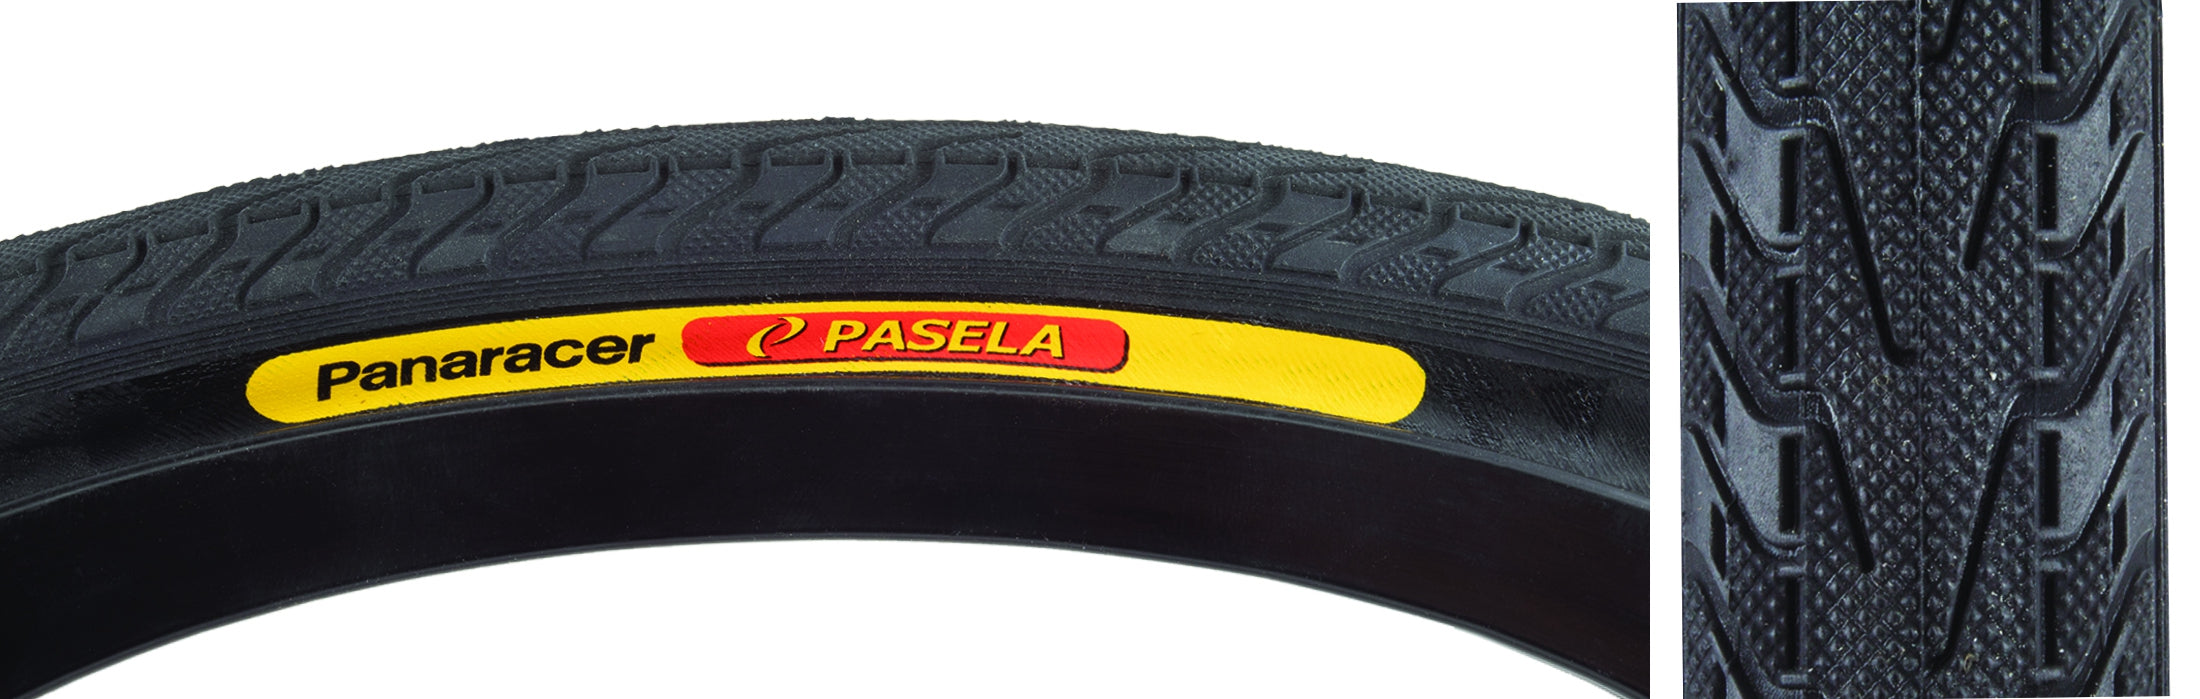 side view of pasela tire in all black